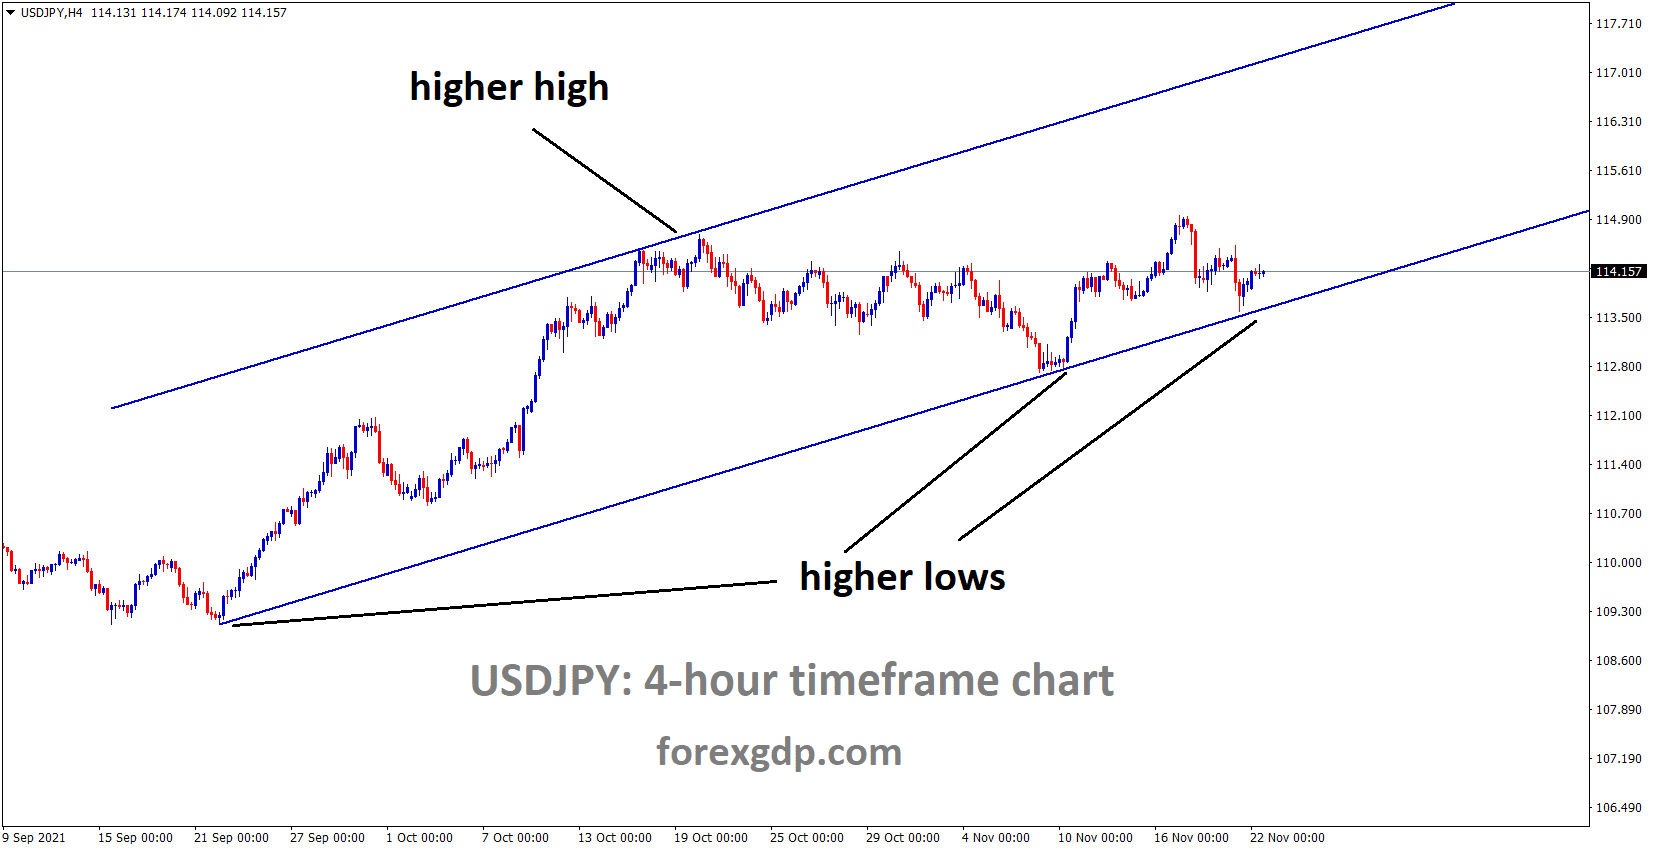 USDJPY is moving in an Ascending channel and the market rebounding from the higher low area of the channel